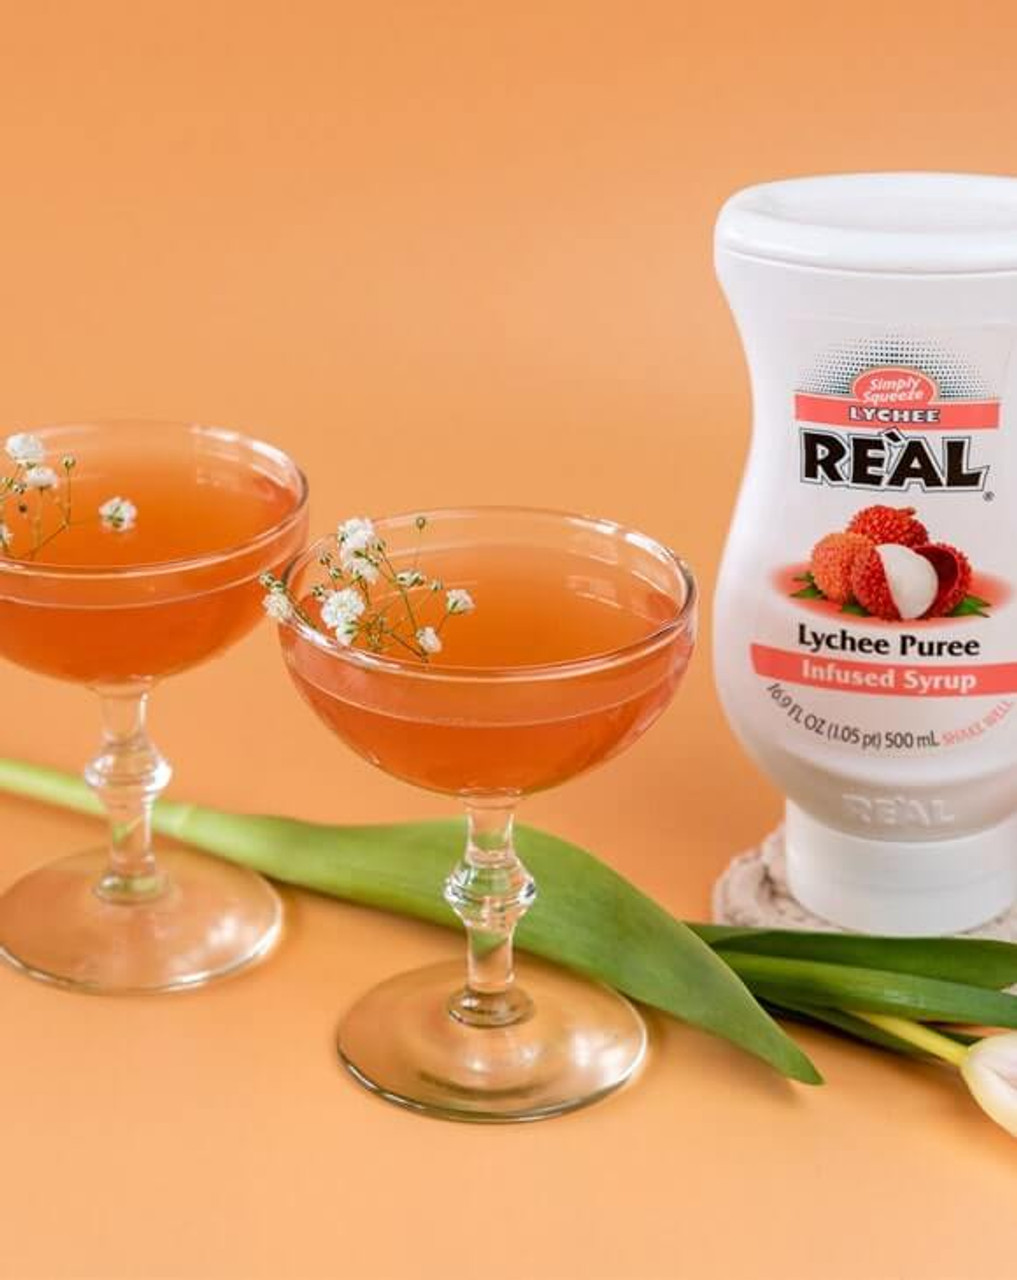 Real Lychee Puree Culinary Infused Syrup | 16.9 fl. oz.-Chicken Pieces